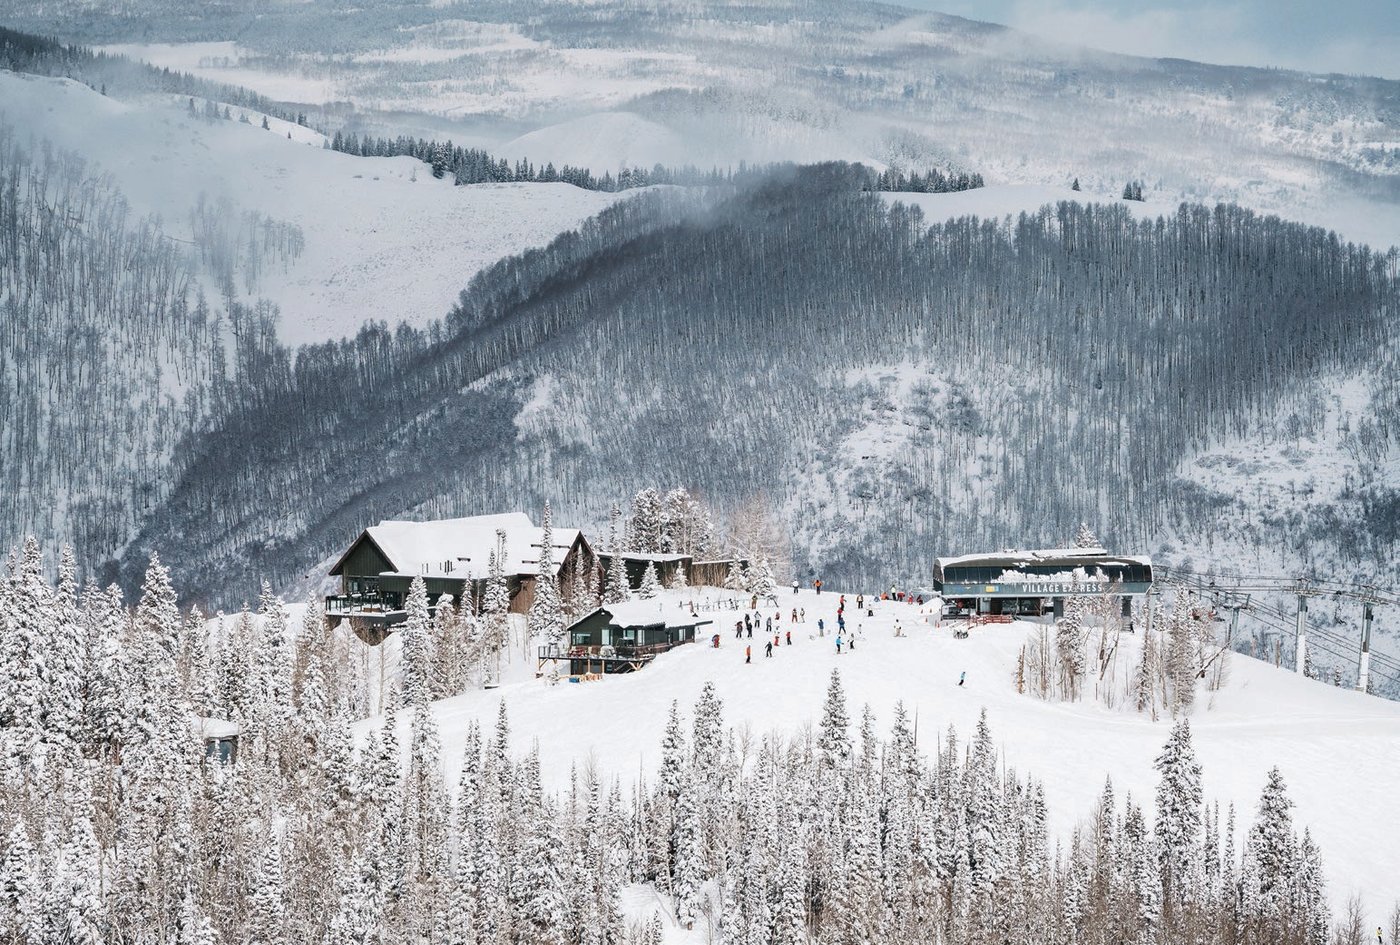 From lodging and events to exclusive excursions, Snowmass Tourism has everything you need for the ultimate trip to Snowmass Village. PHOTO COURTESY OF SNOWMASS TOURISM